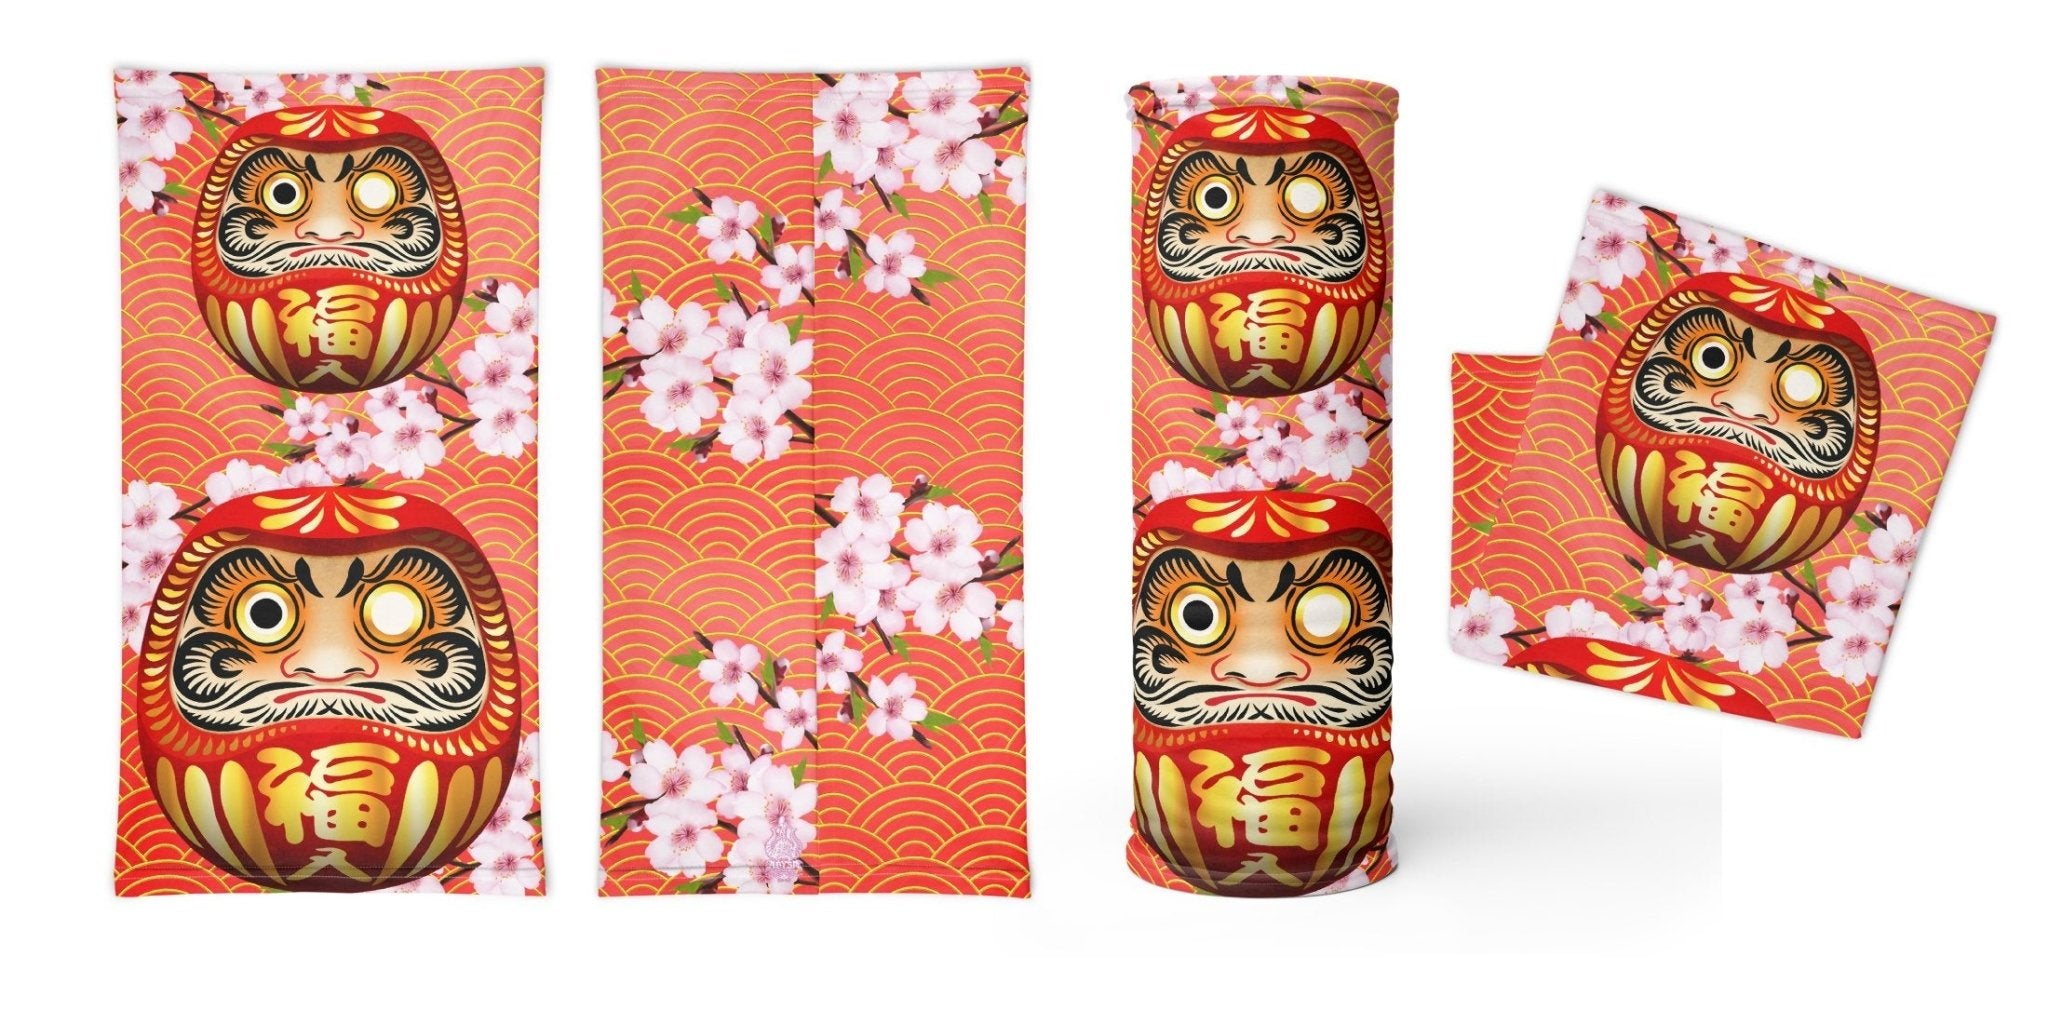 Japanese Neck Gaiter, Face Mask, Head Covering, Daruma, Funny Anime Style Outfit - Red - Abysm Internal